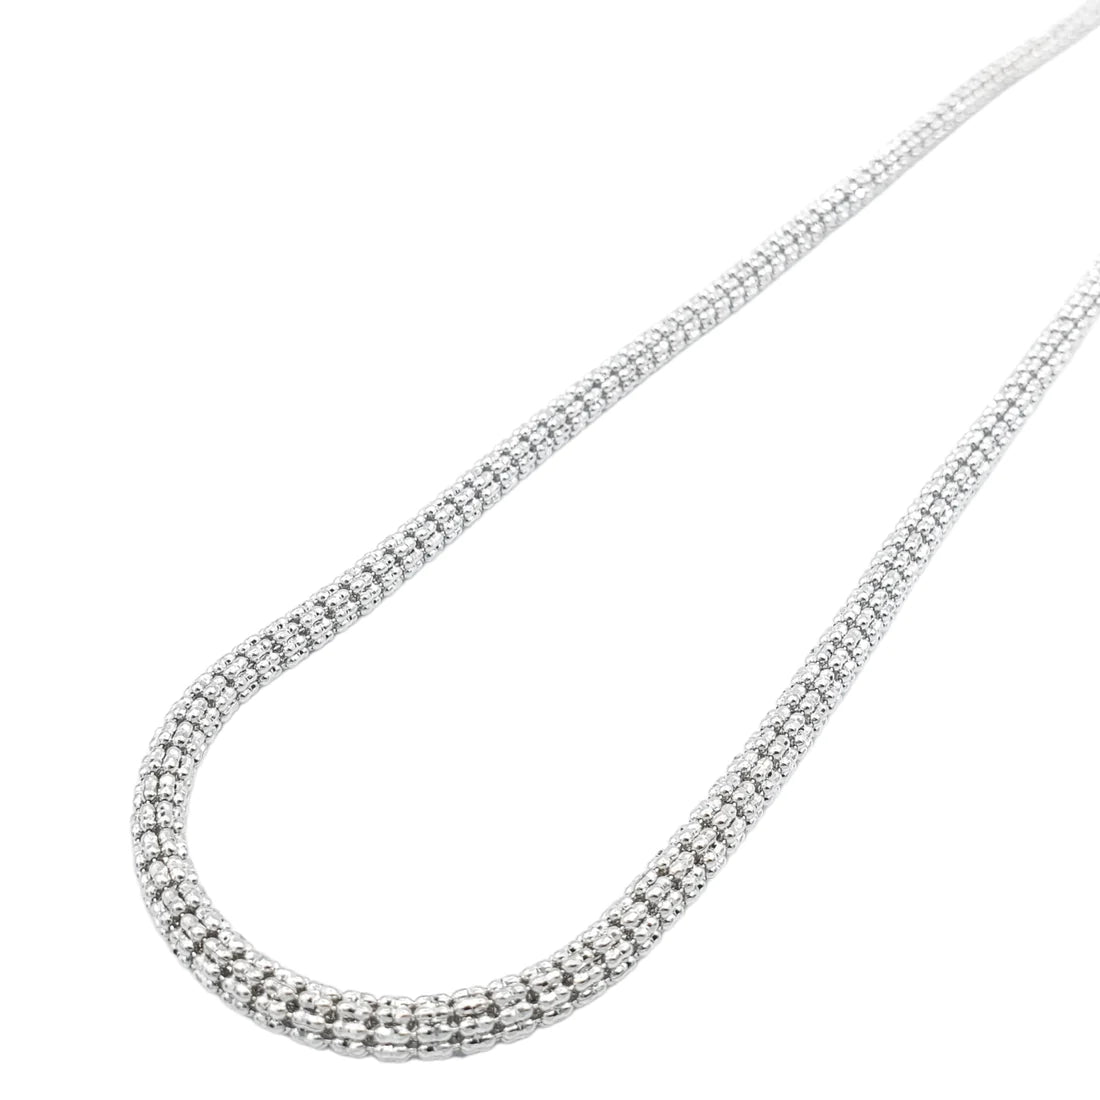 14K 3.5mm Ice Link Chain